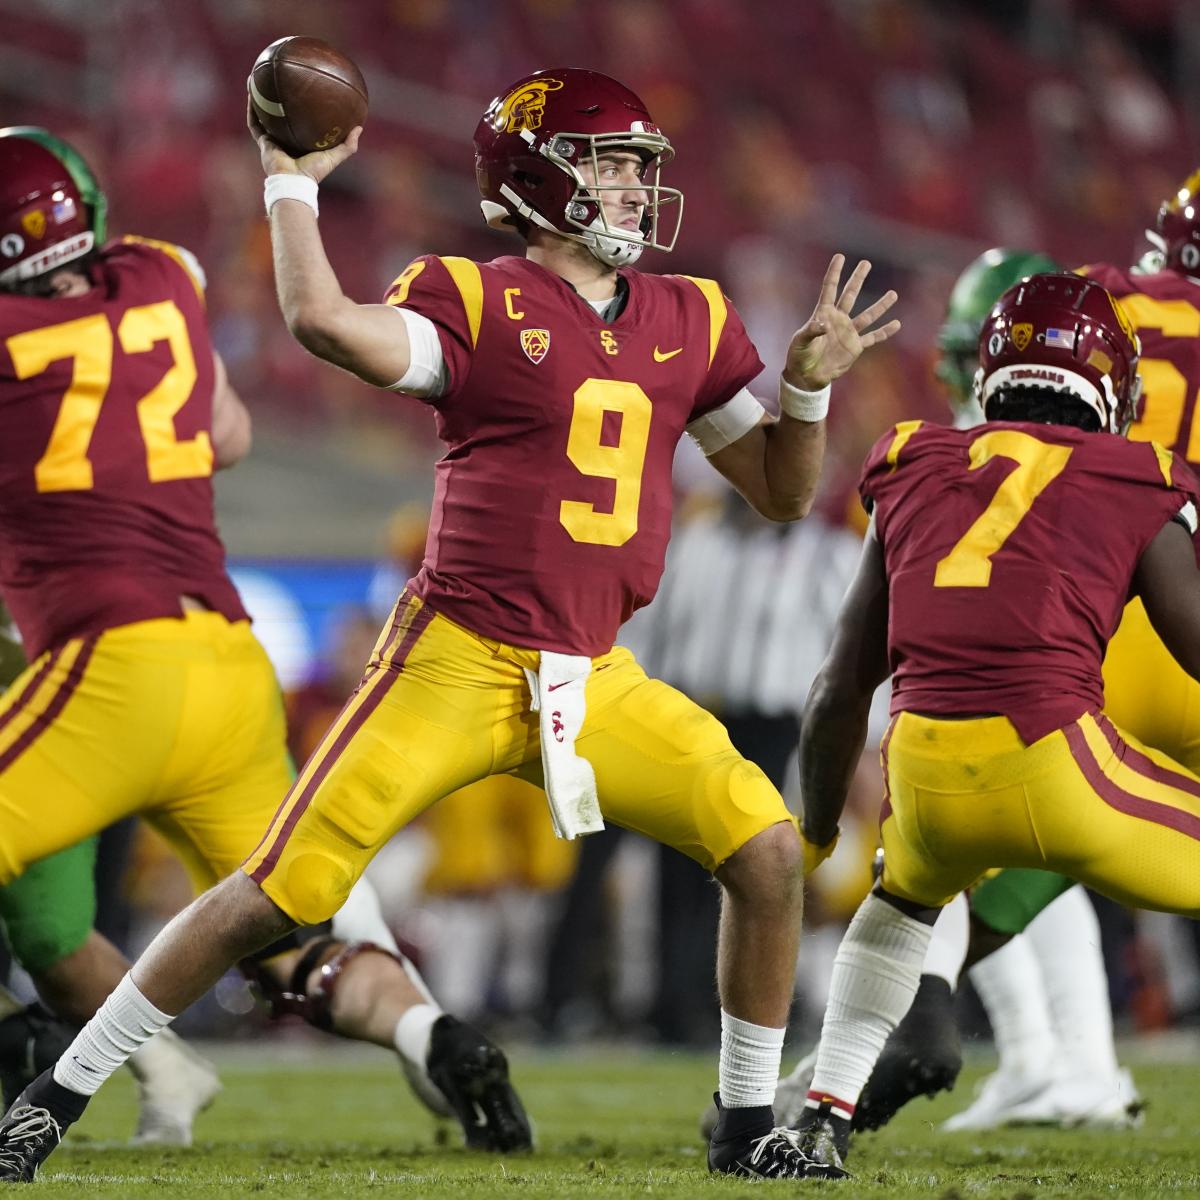 USC Spring Game 2021 Top Storylines and Prospects to Watch Flipboard